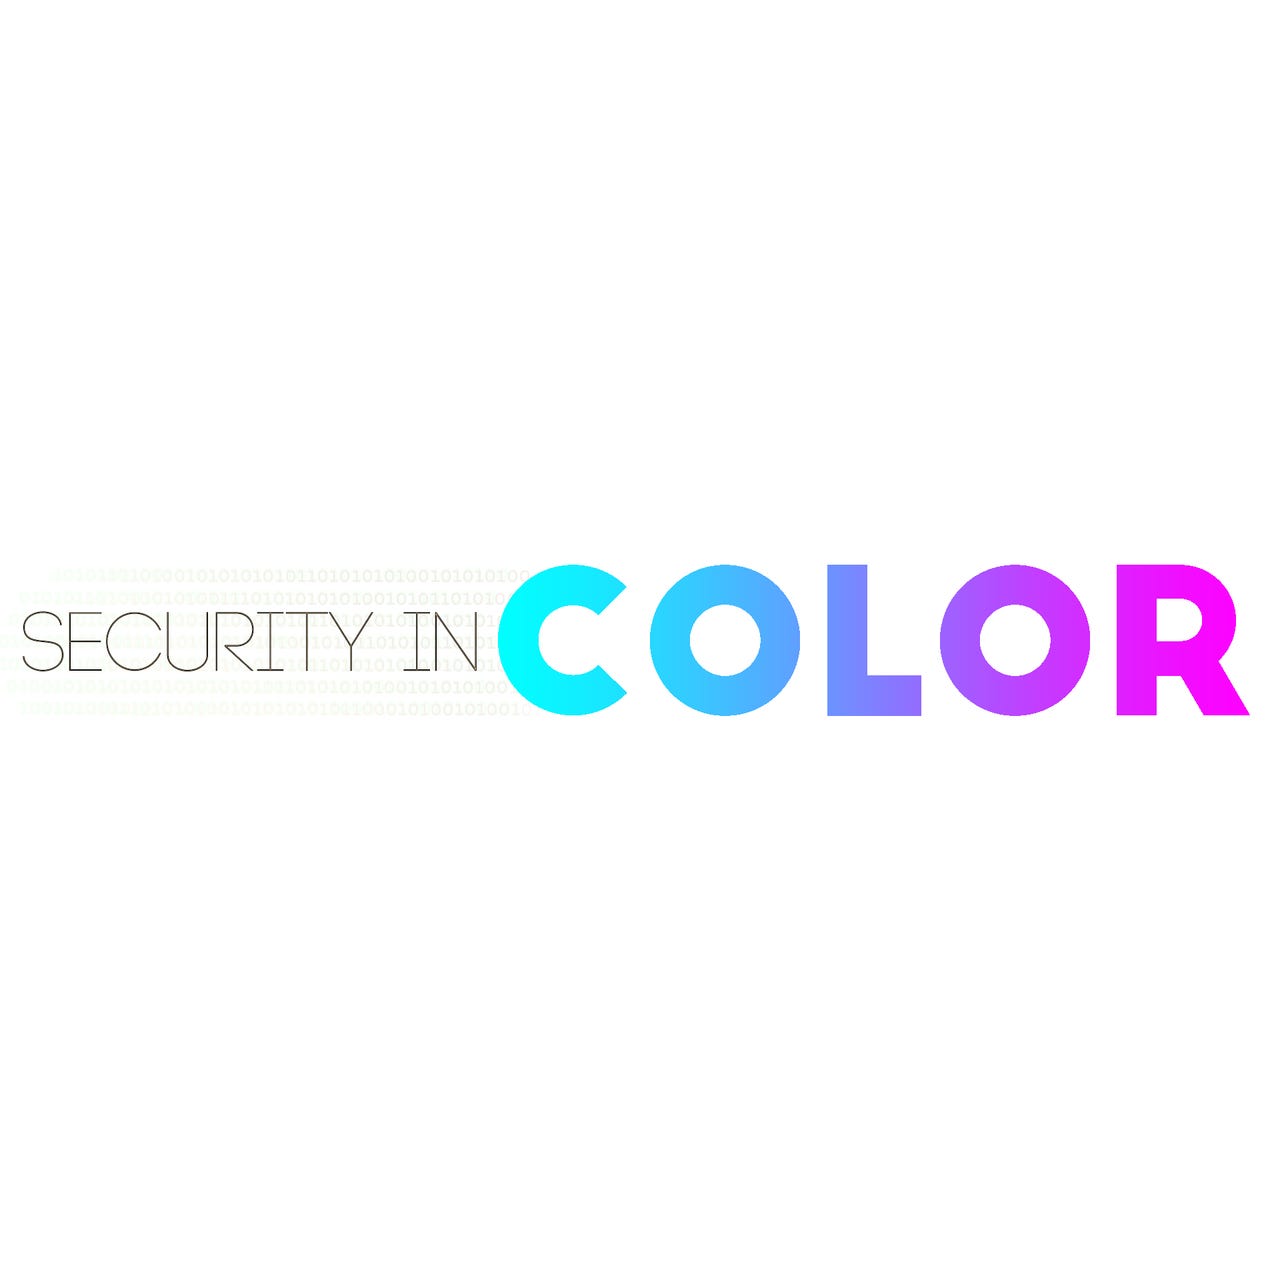 Security in Color Newsletter